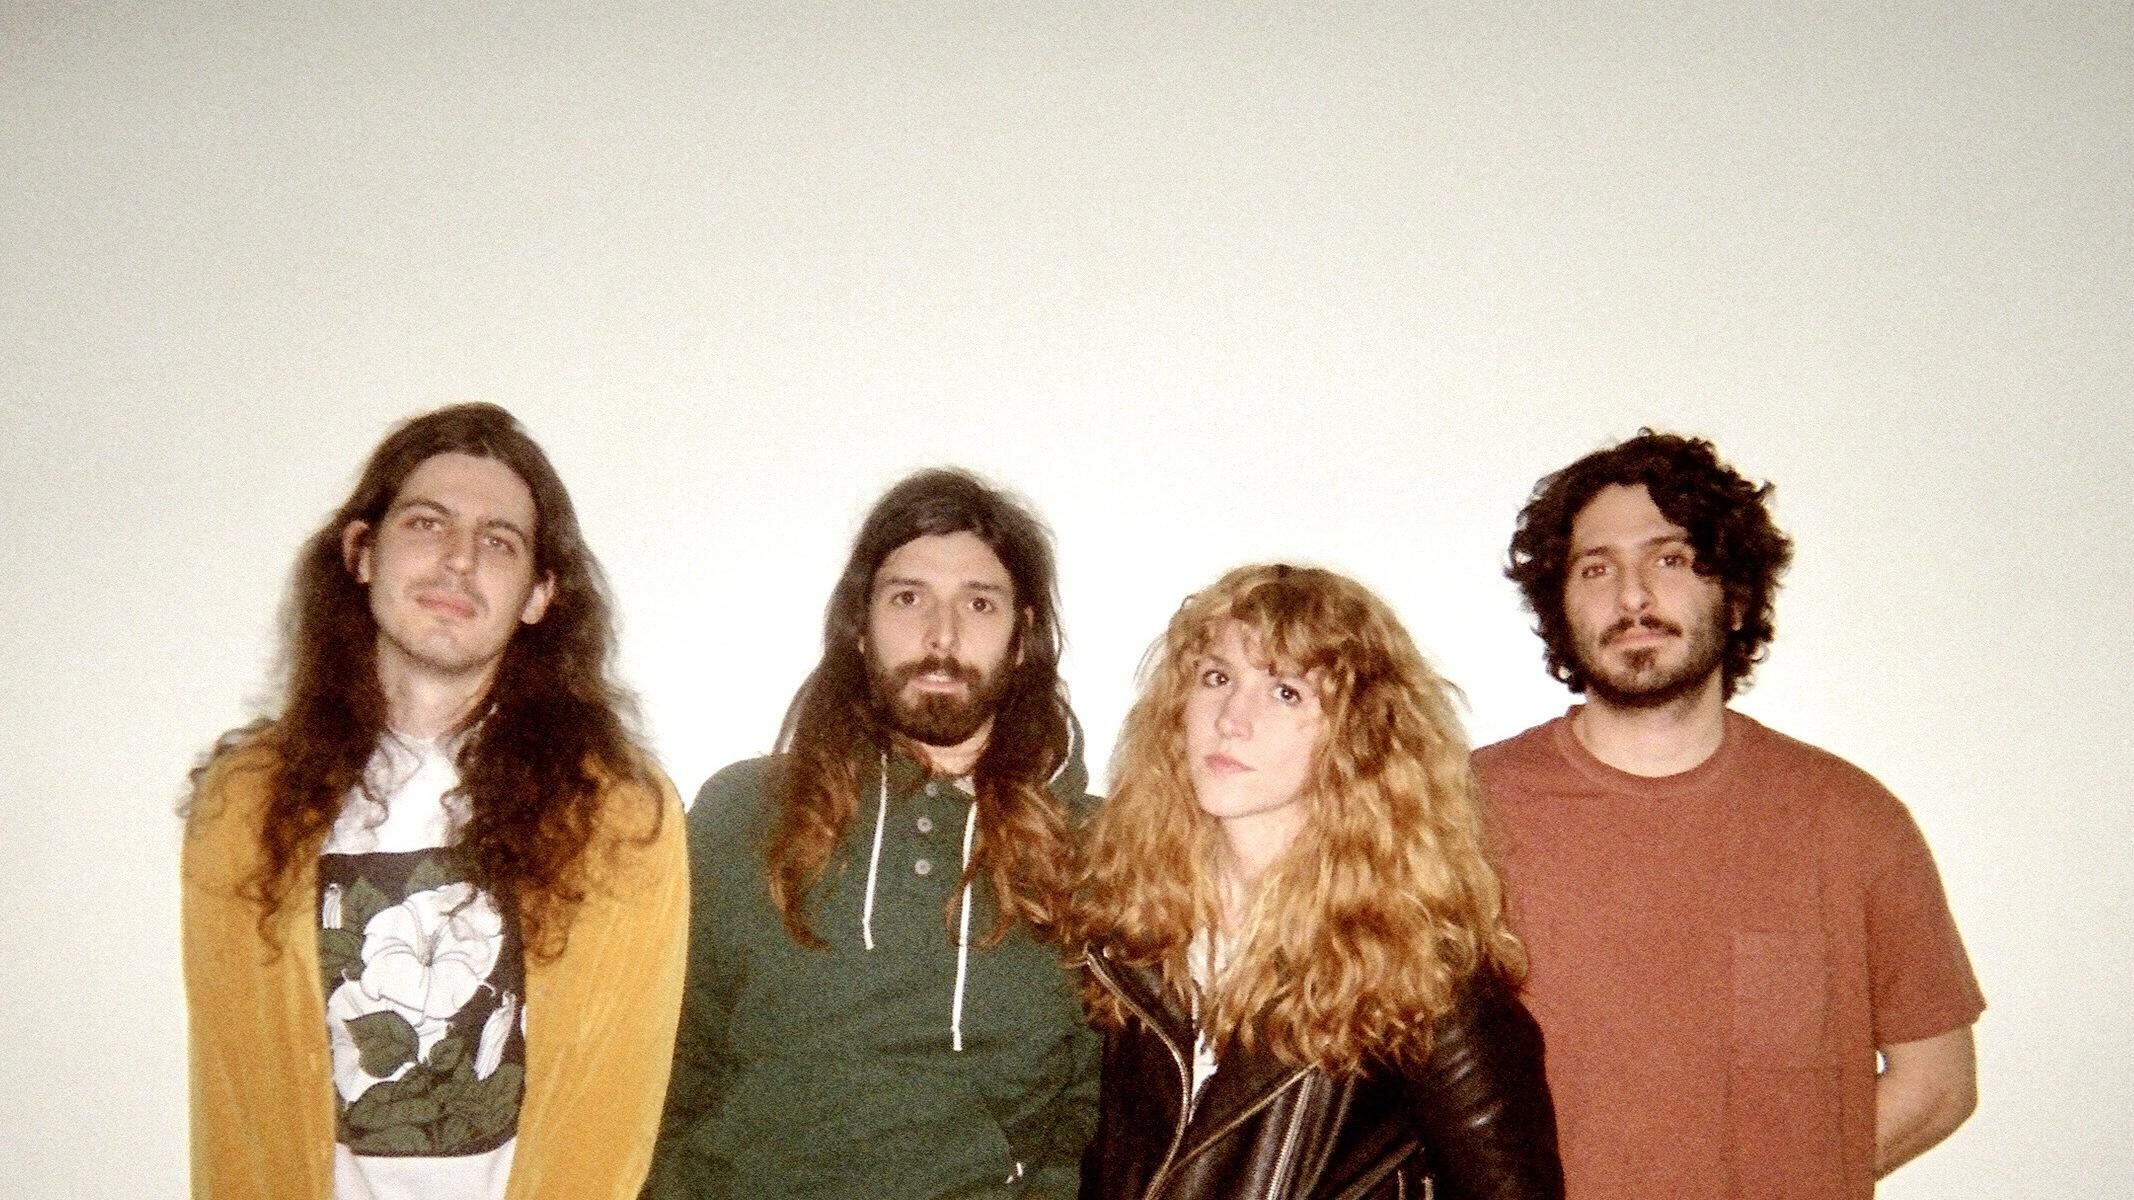 Widowspeak le hace cover a Neil Young